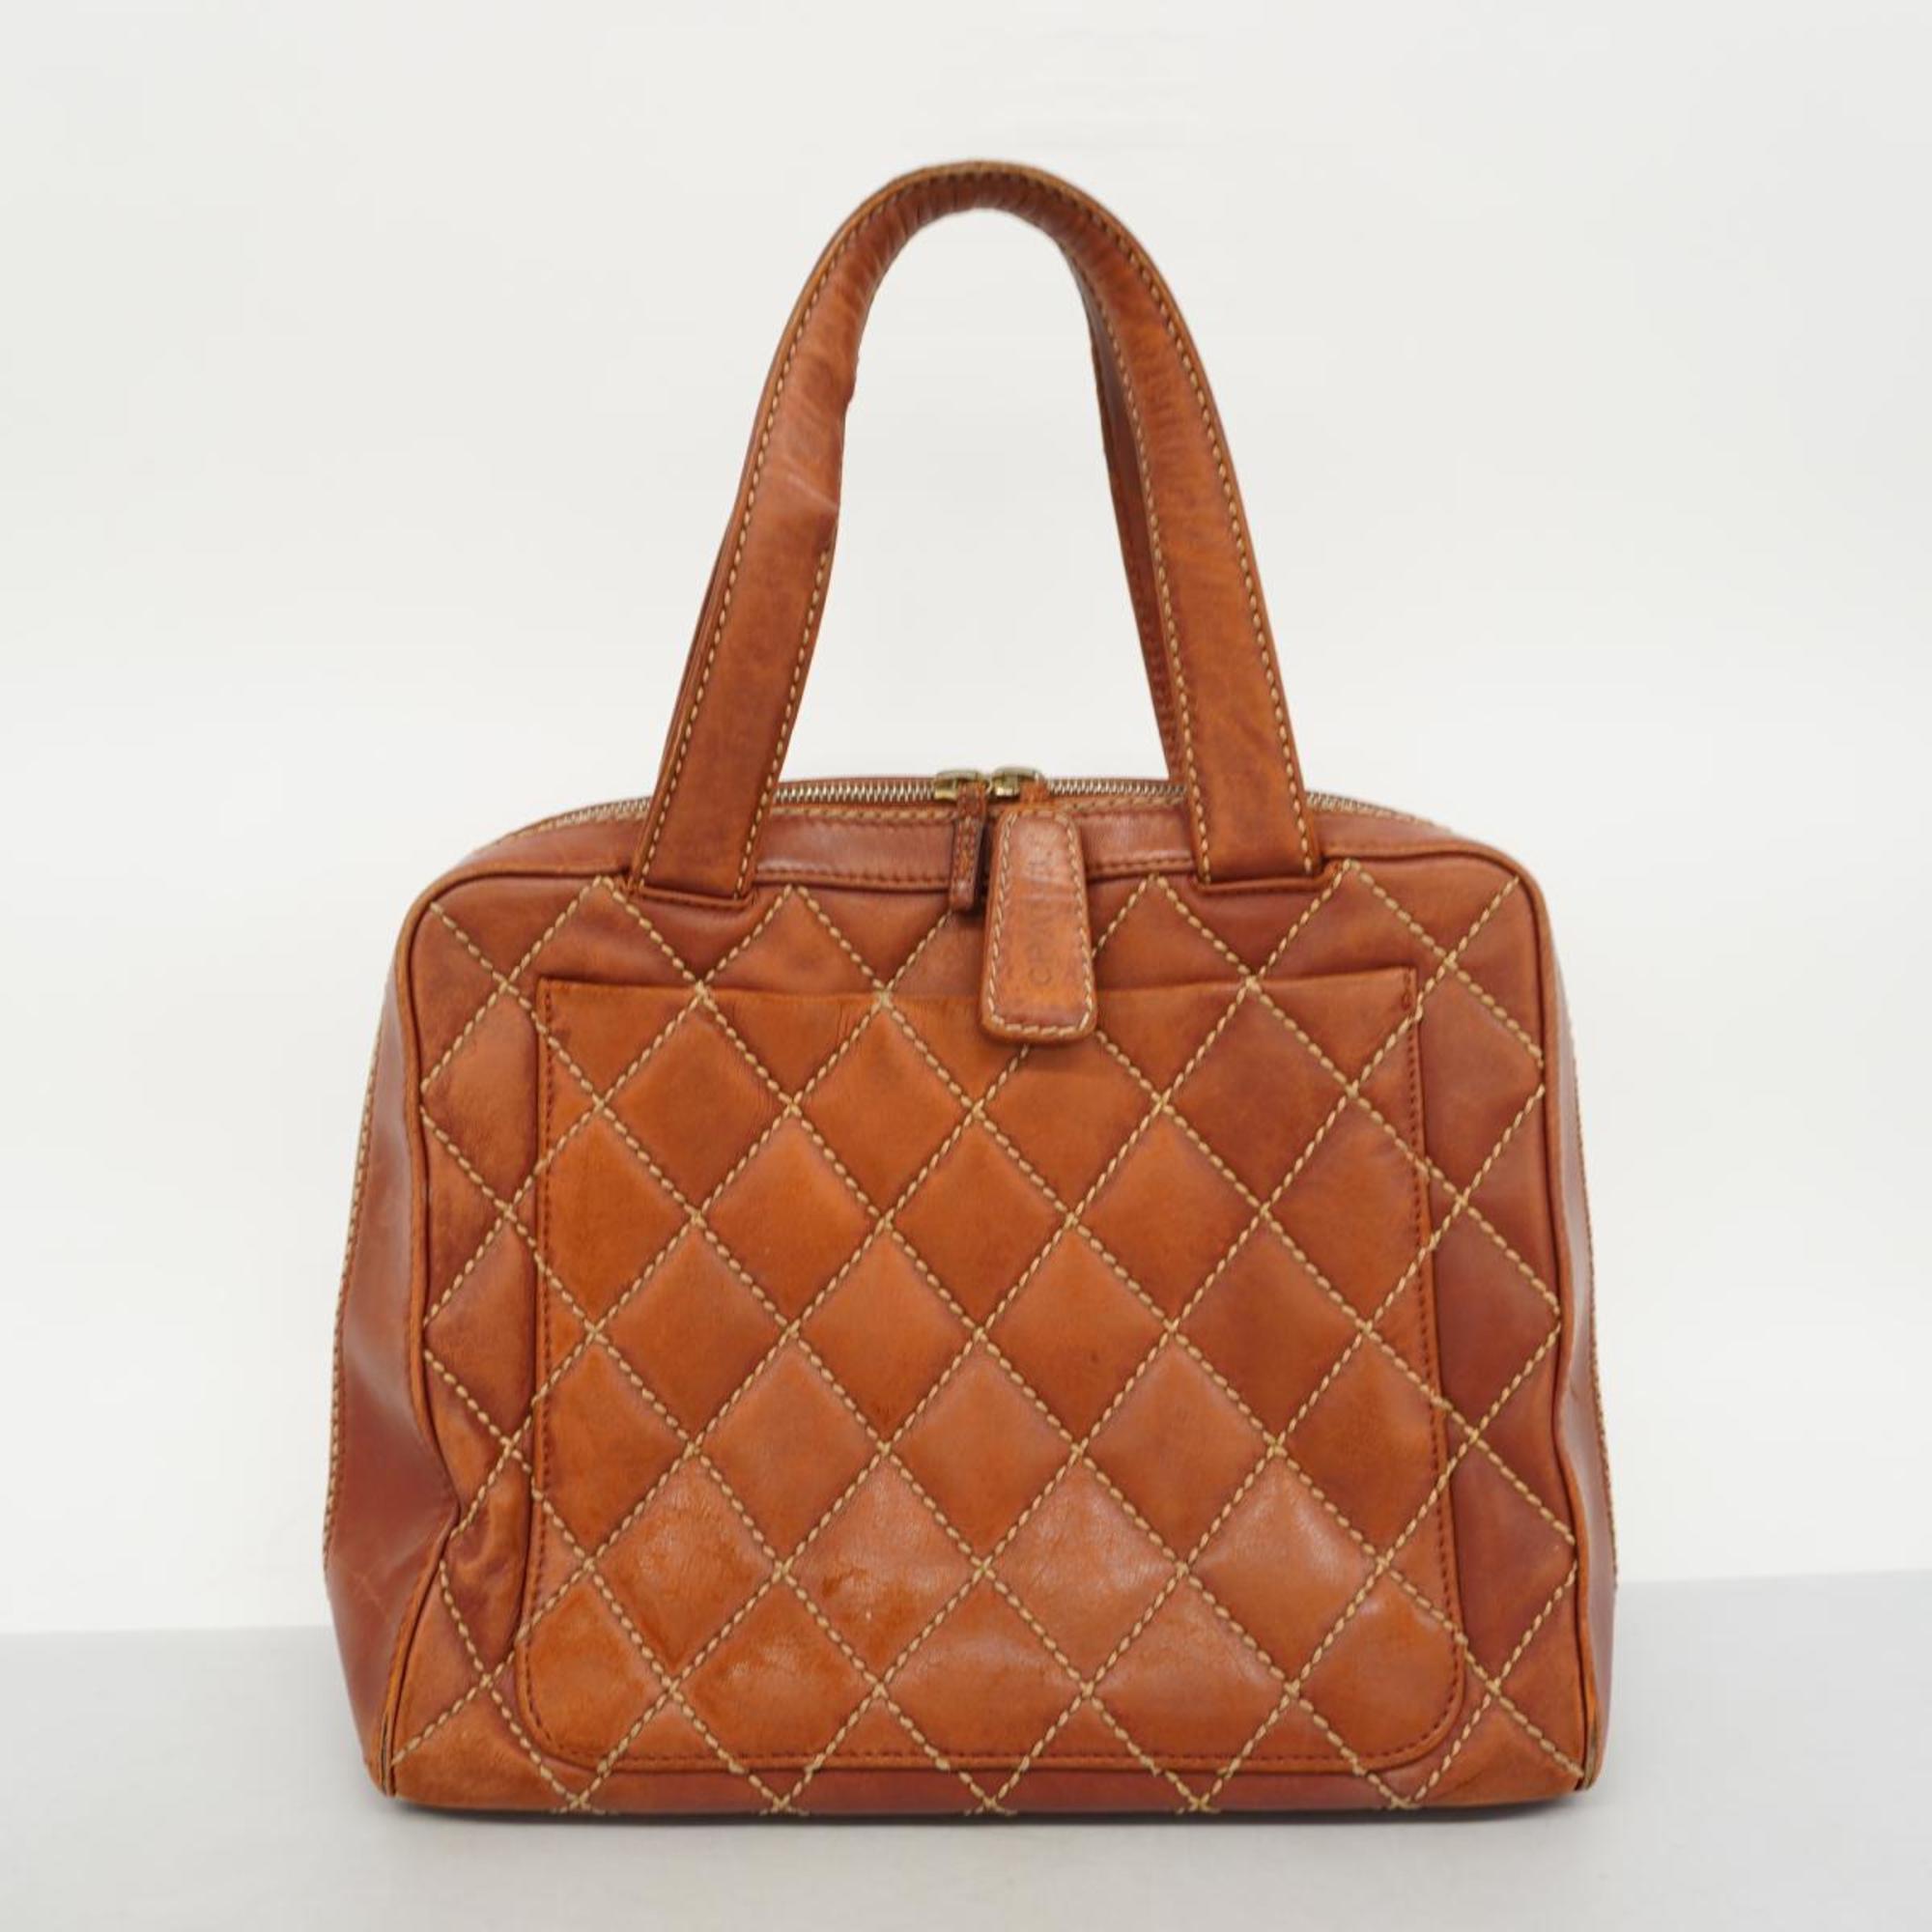 Chanel Tote Bag Wild Stitch Leather Brown Women's